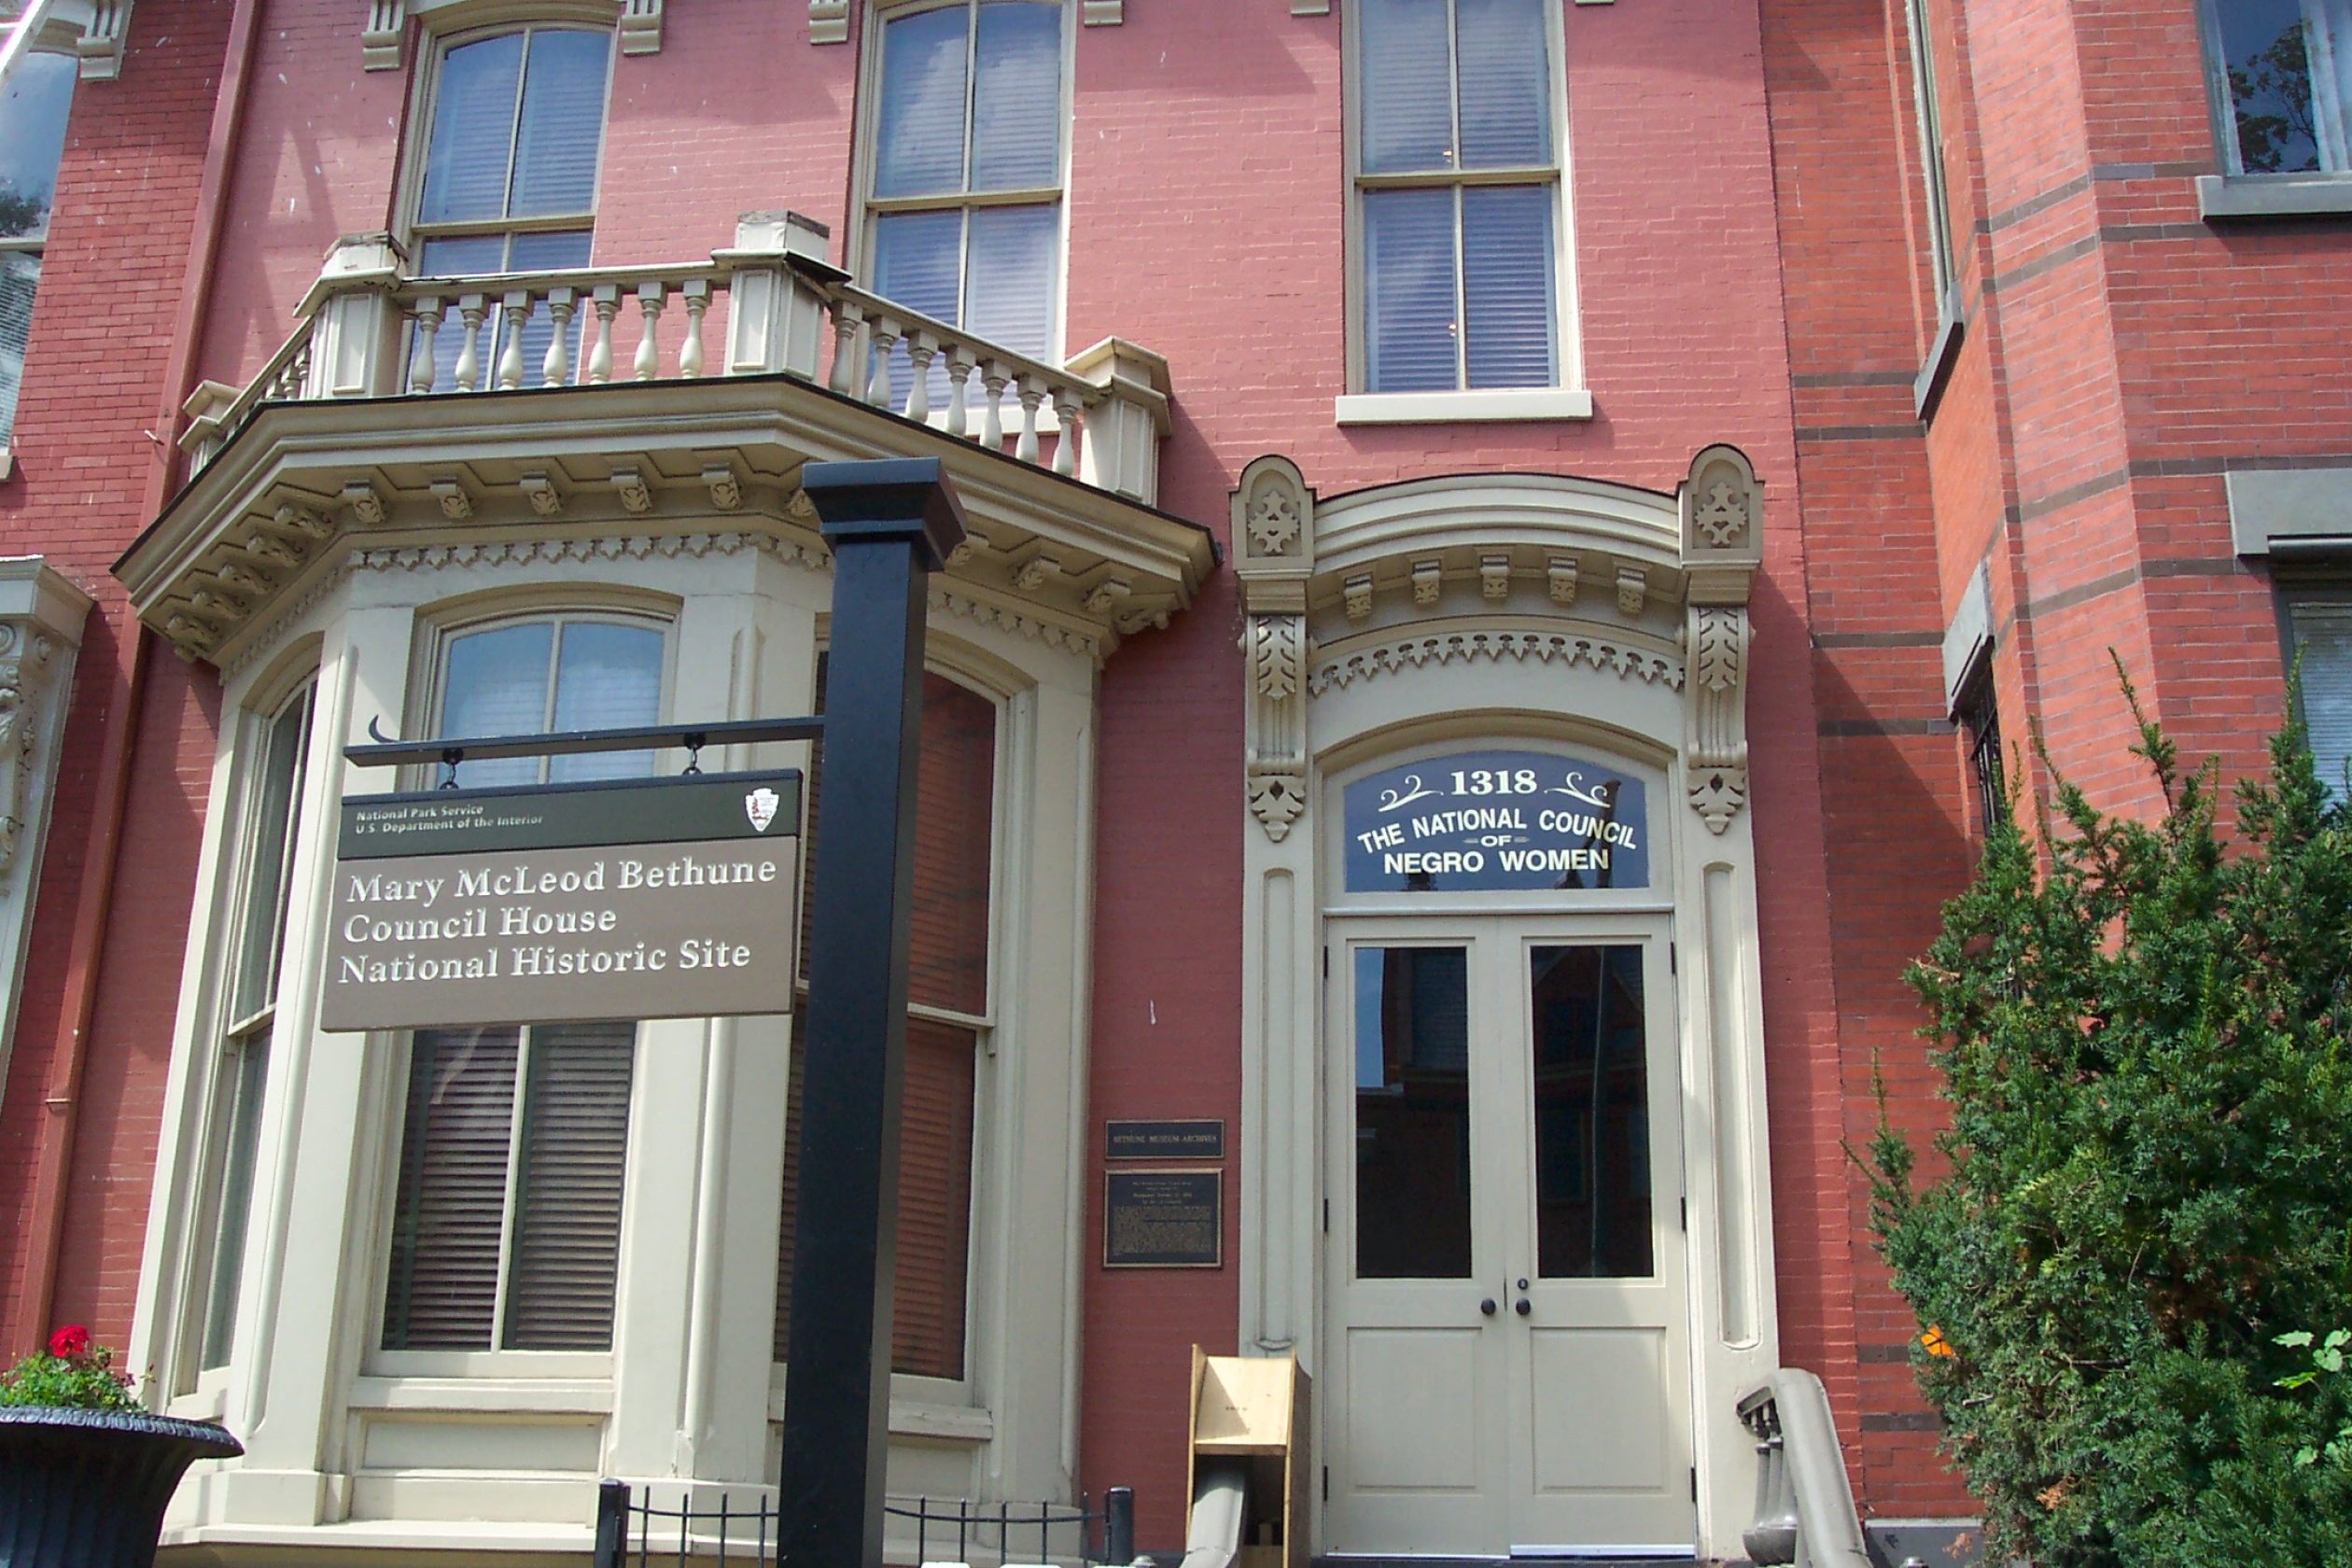 Exterior of Mary McLeod Bethune Council House in Washington DC